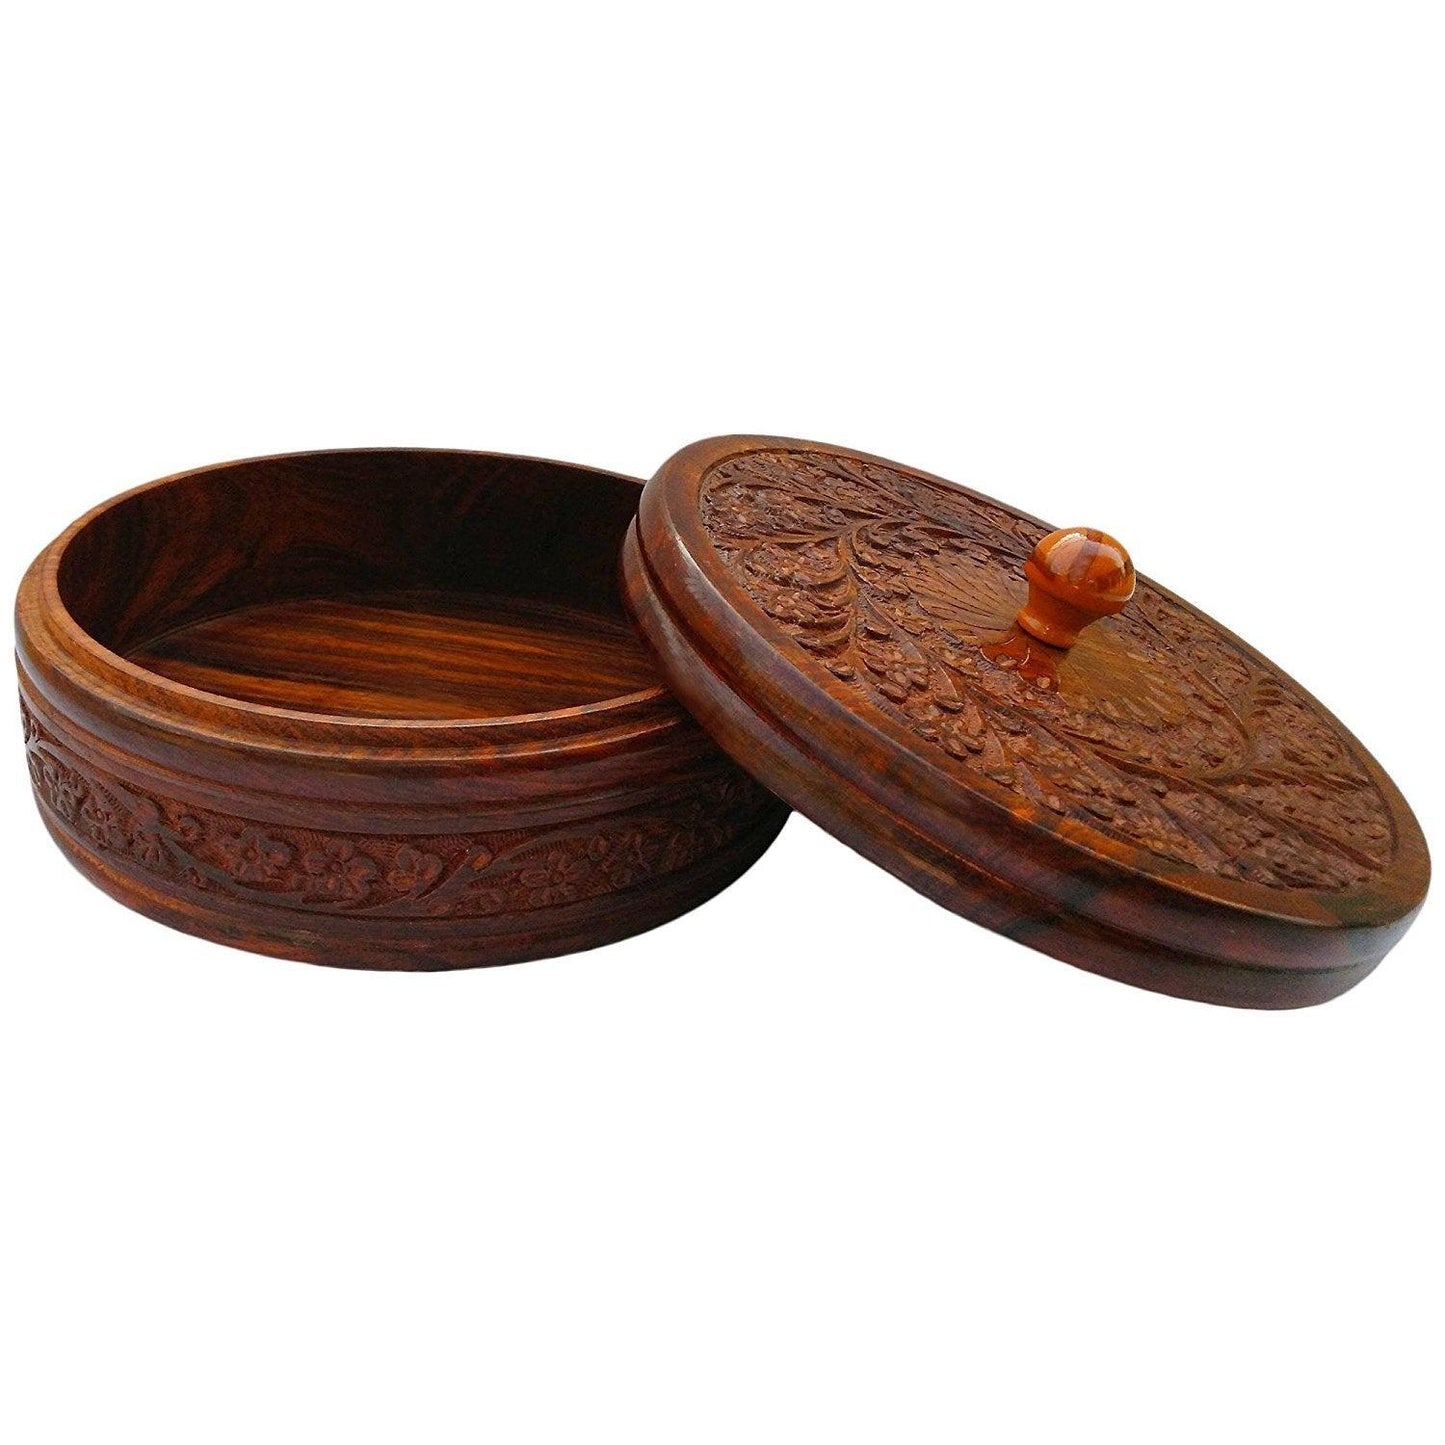 Antique handmade Carving Wooden Box Pot Serving Bowl with Lid for Chapatis (Brown, 8-inch) - GreentouchCrafts